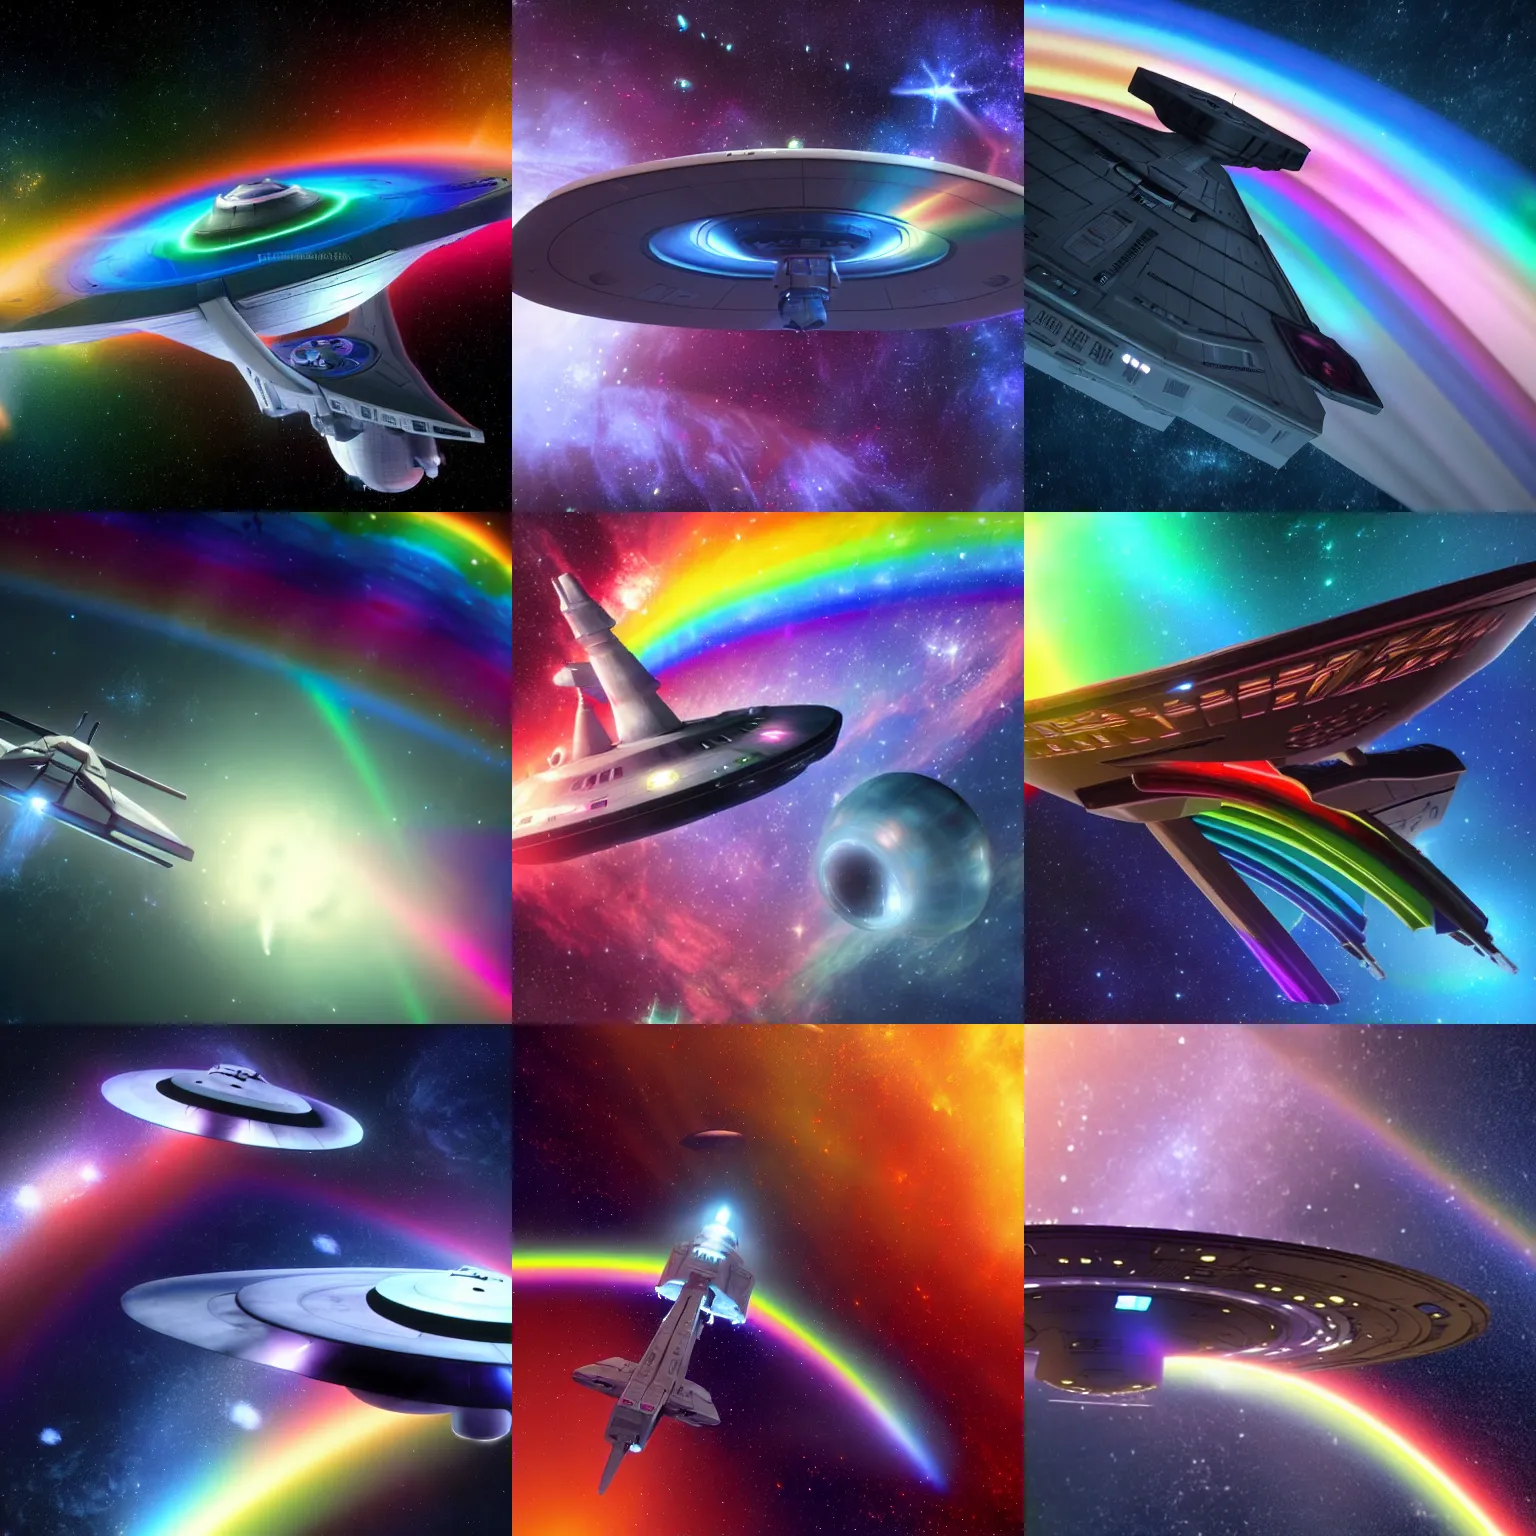 Prompt: The Star Ship Enterprise from star trek flying through a gay nebula. Trending on artstation 3d unreal engine rendering high definition. Super gay lgbt. The starship enterprise is leaving a rainbow trail behind it and it's transgender. The nebula is a rainbow and the ship is pained in trans colors.